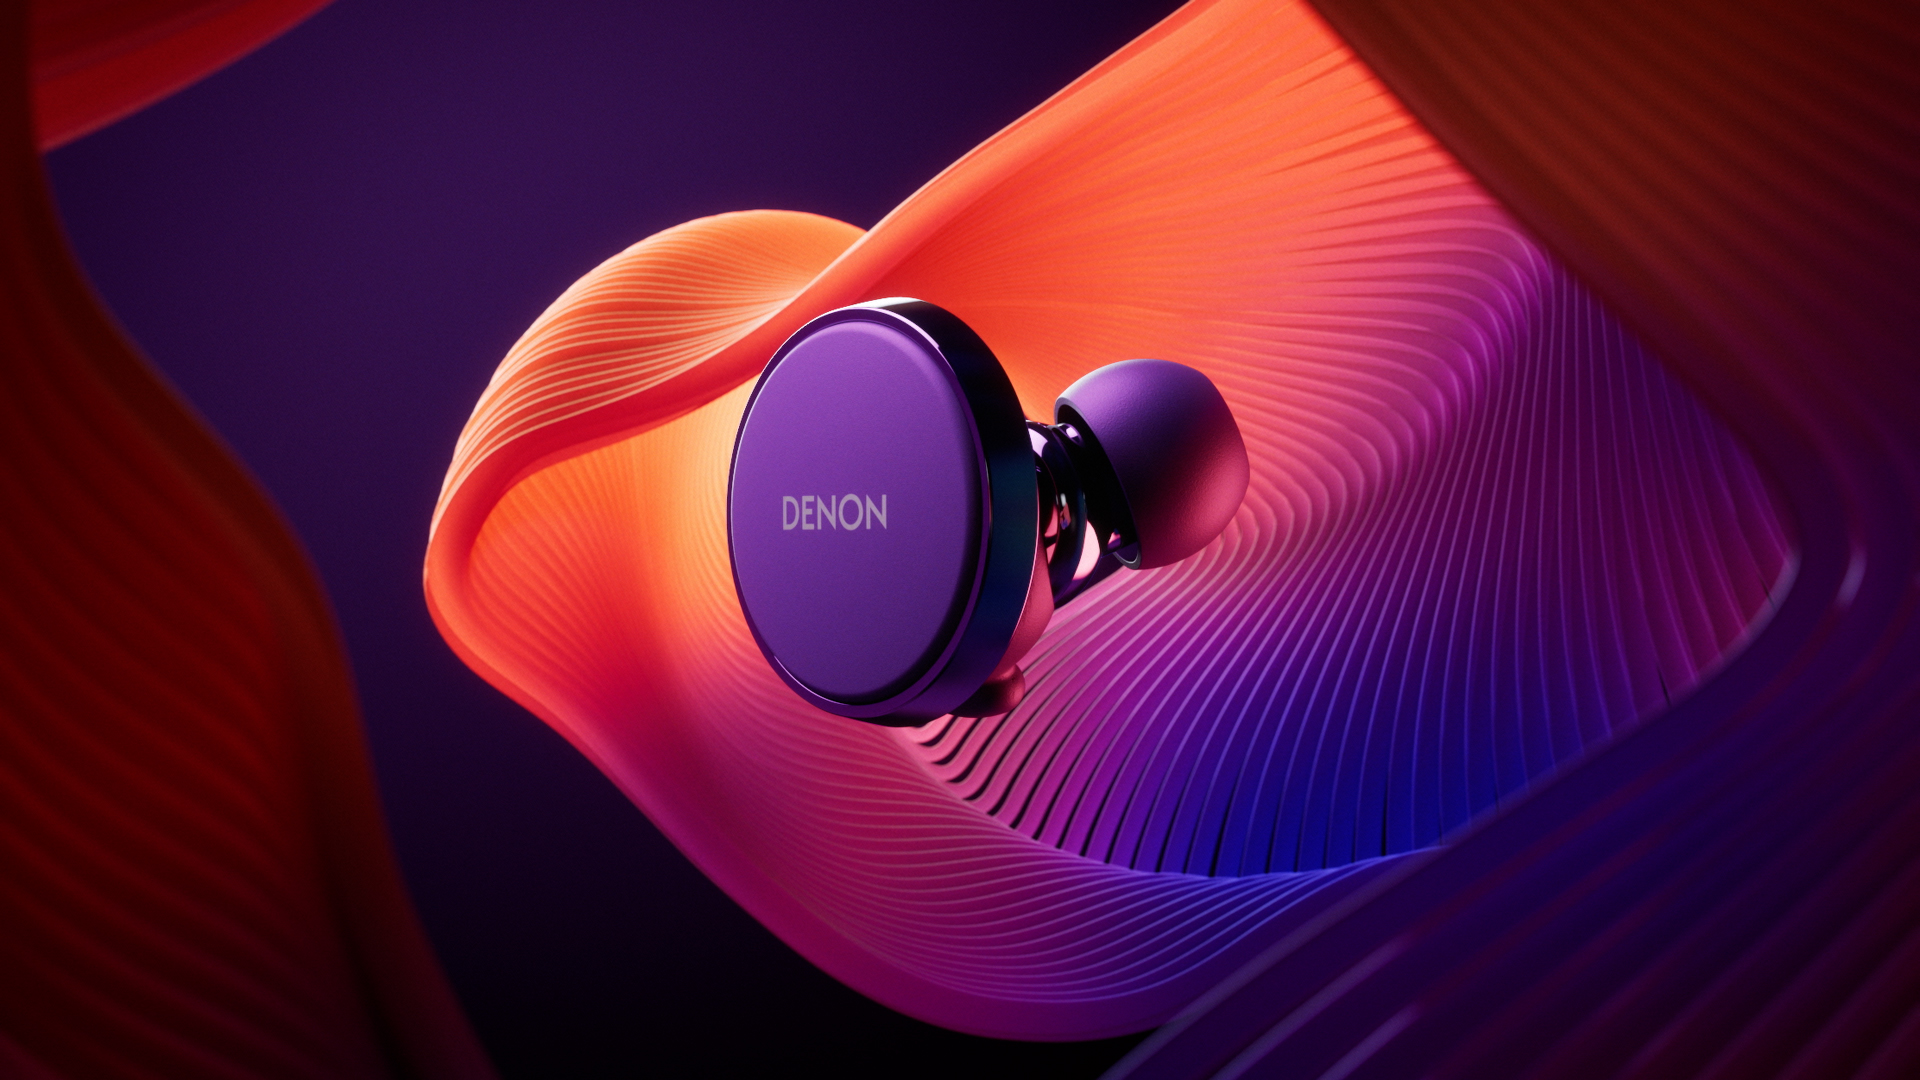 Denon PerL Earbuds range is Rolling Stone sound - redefining UK personalised